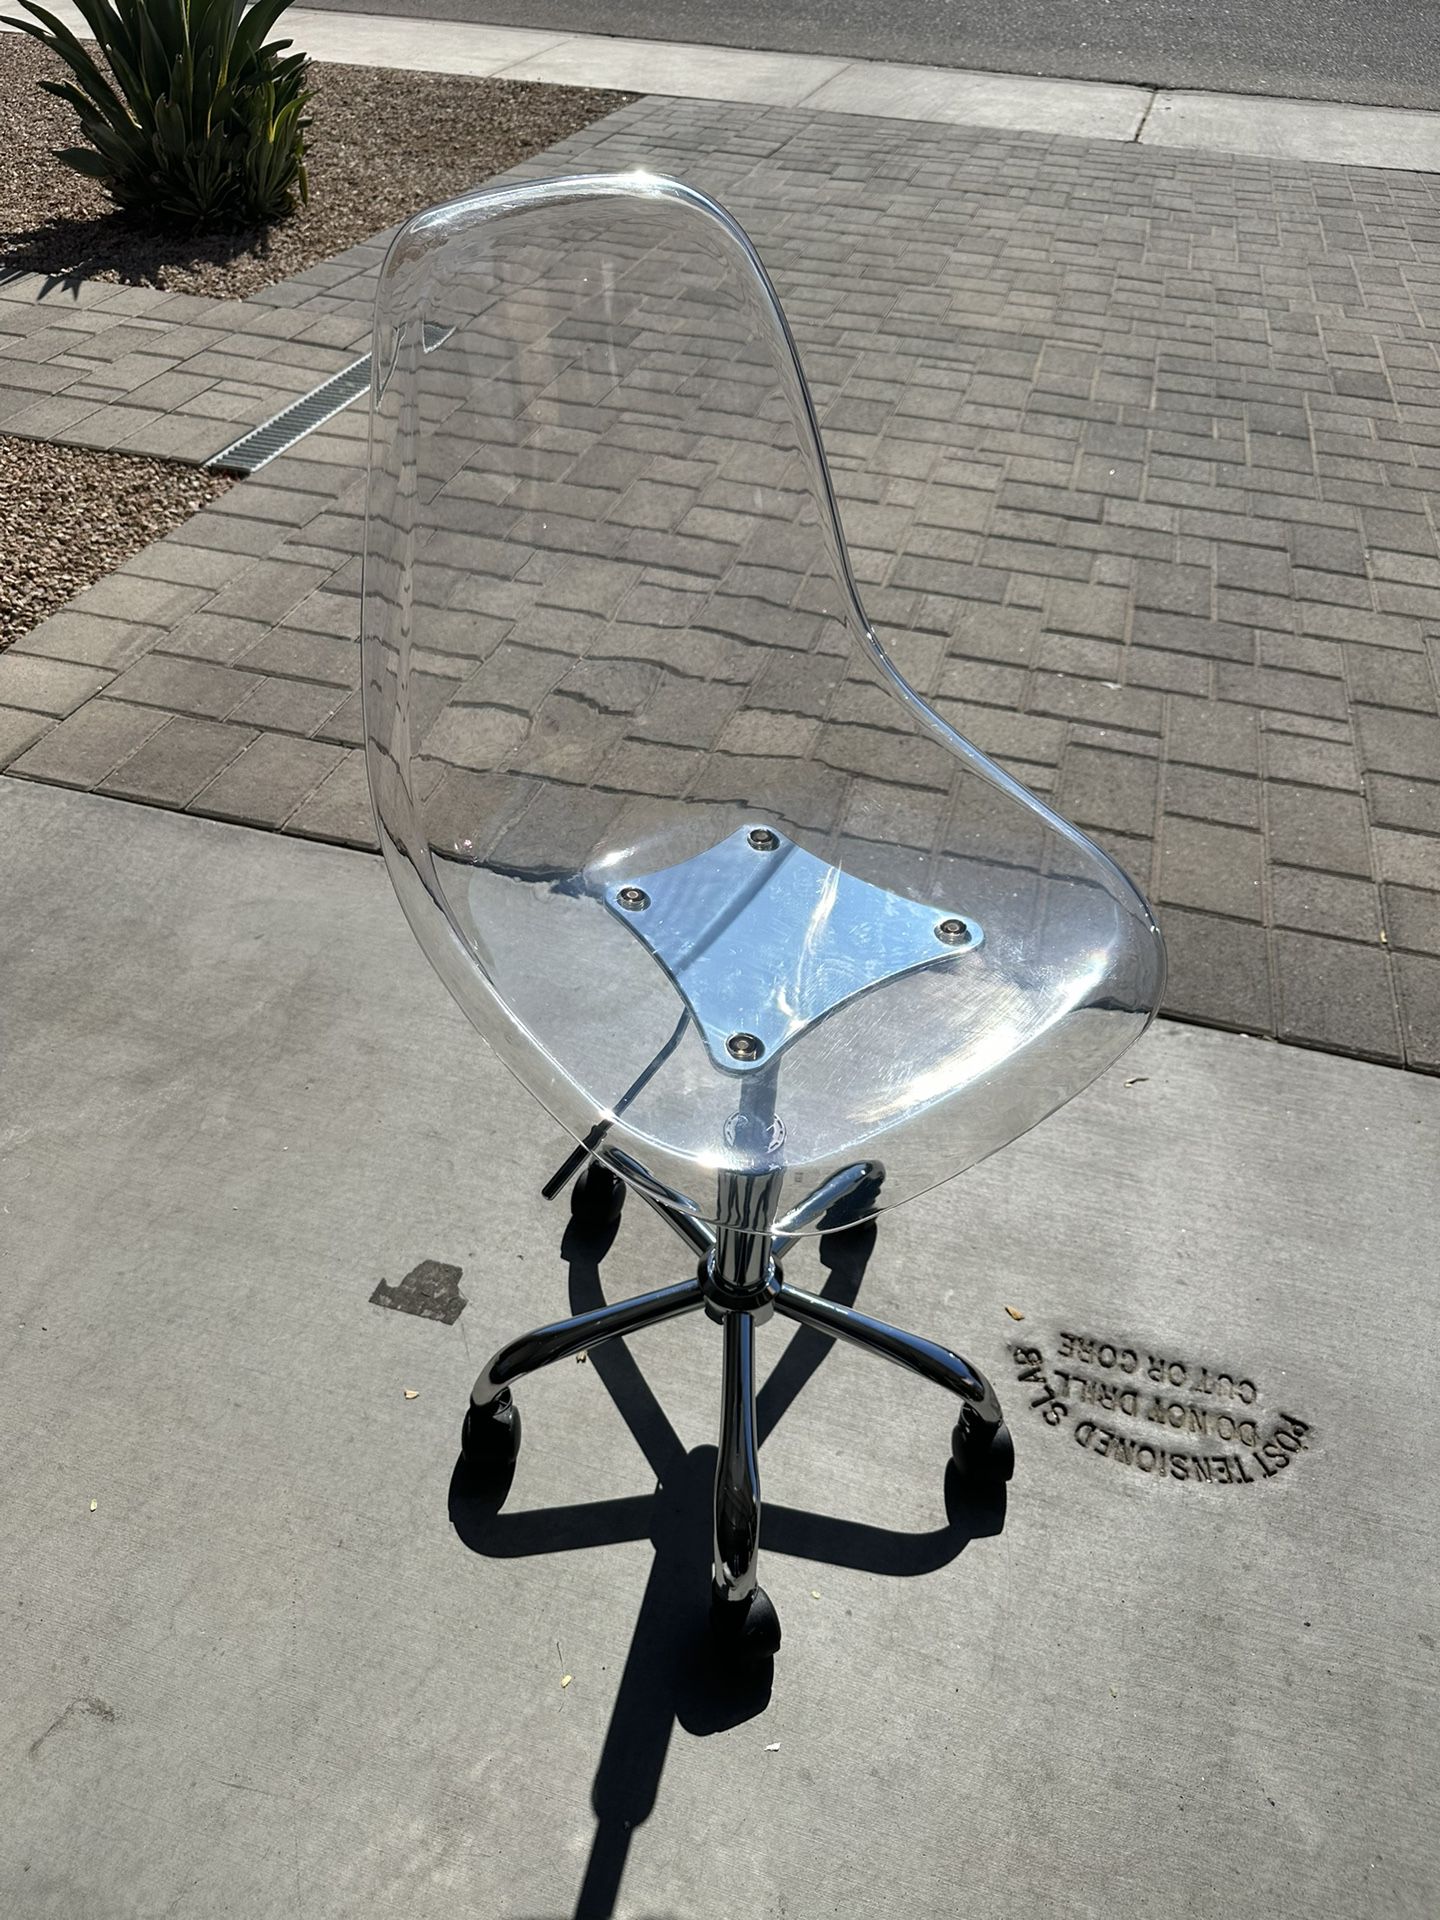 Modern Clear Acrylic Height Adjustable Rolling Chair